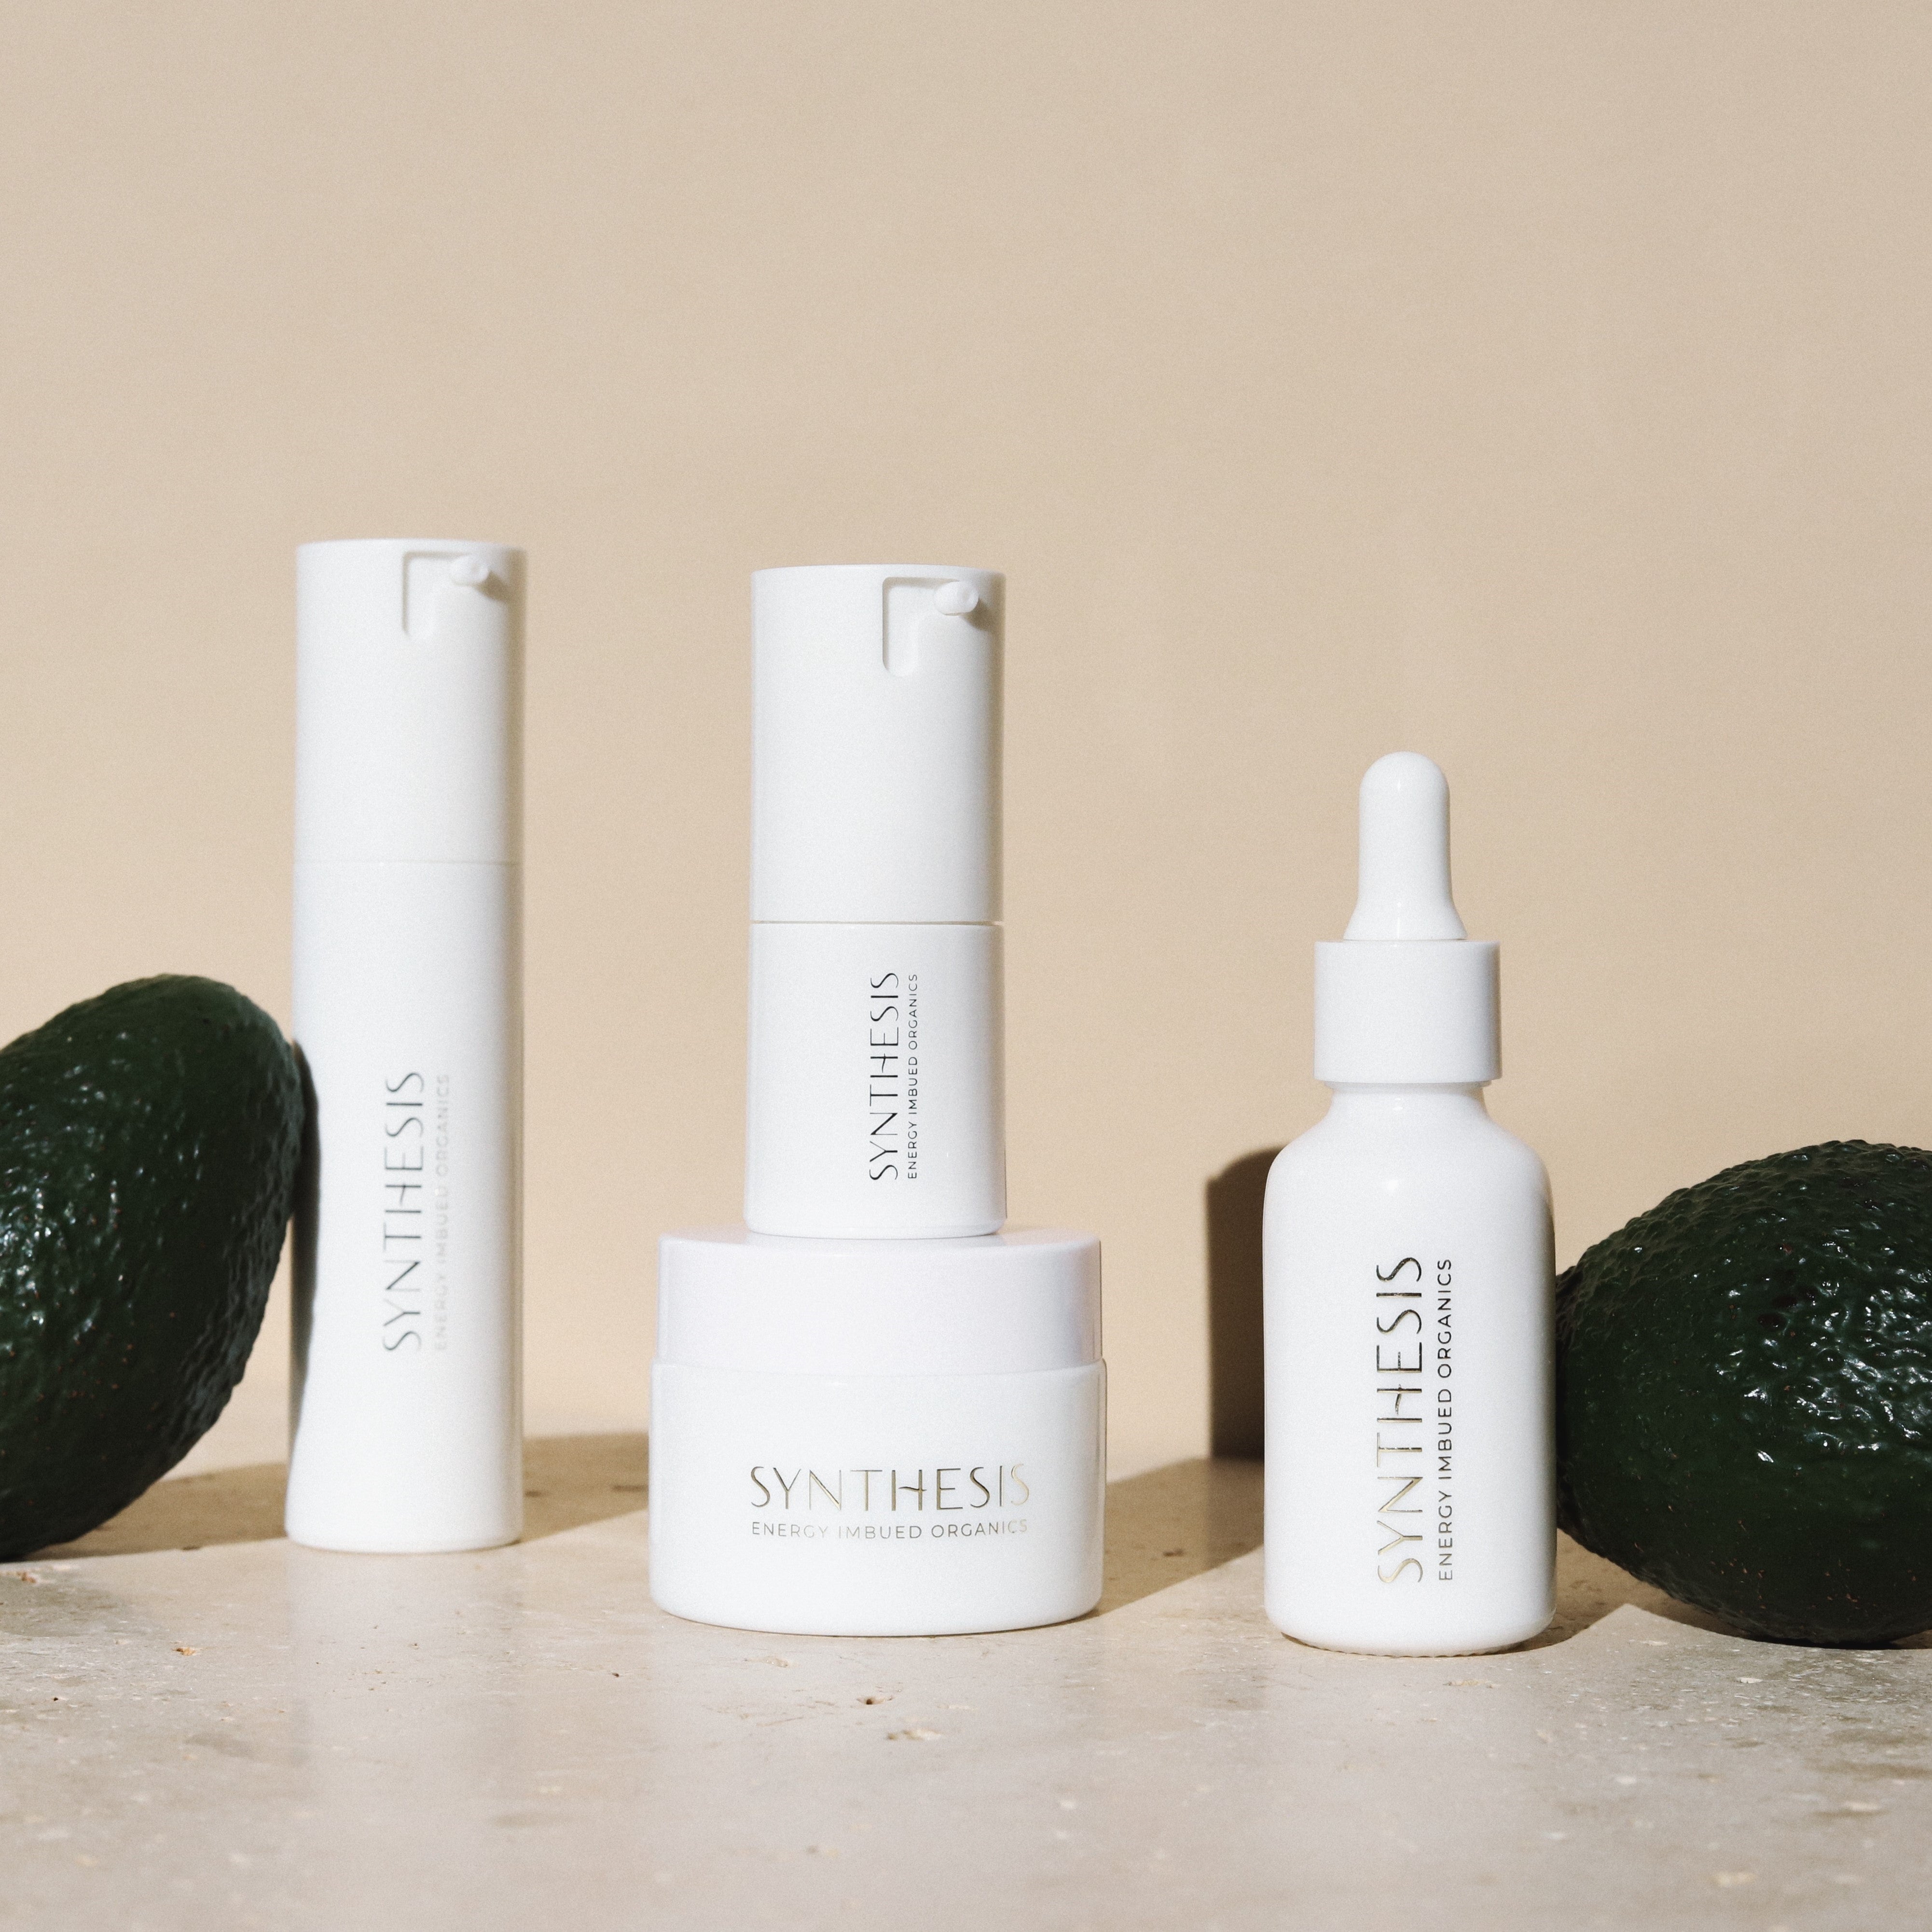 Normal Skin Collection Synthesis Organics 